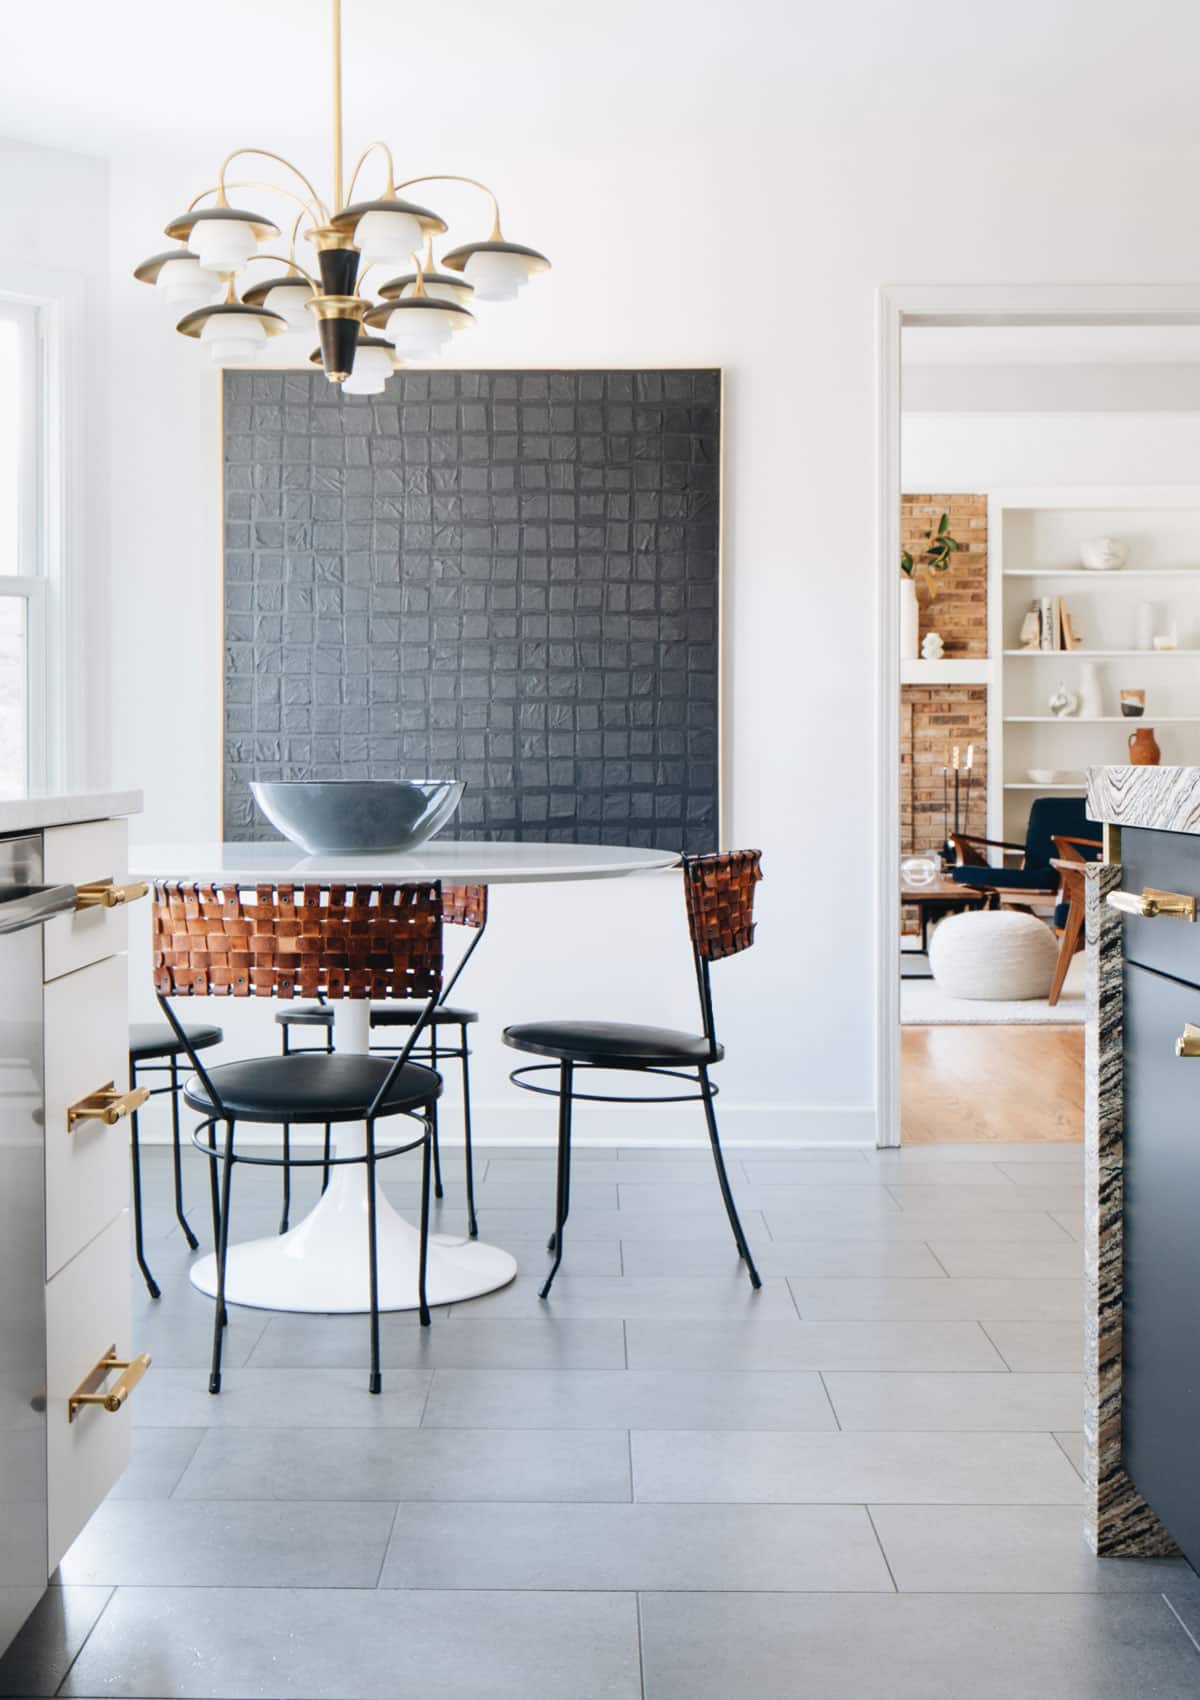 White Kitchens Are Not Out Here are 7 Ideas to Warm Them Up